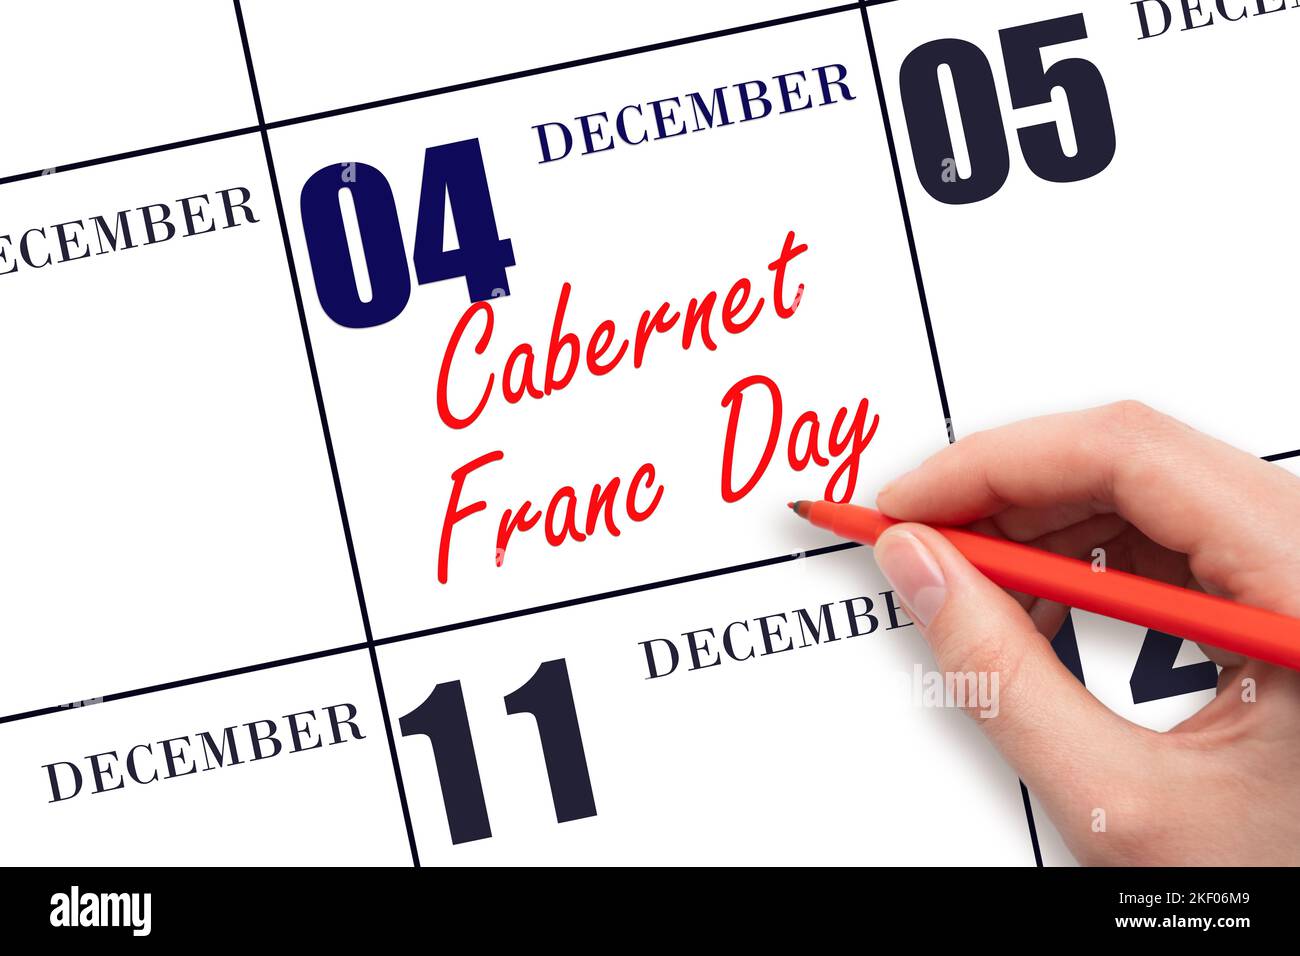 December 4th. Hand writing text Cabernet Franc Day on calendar date. Save the date. Holiday.  Day of the year concept. Stock Photo